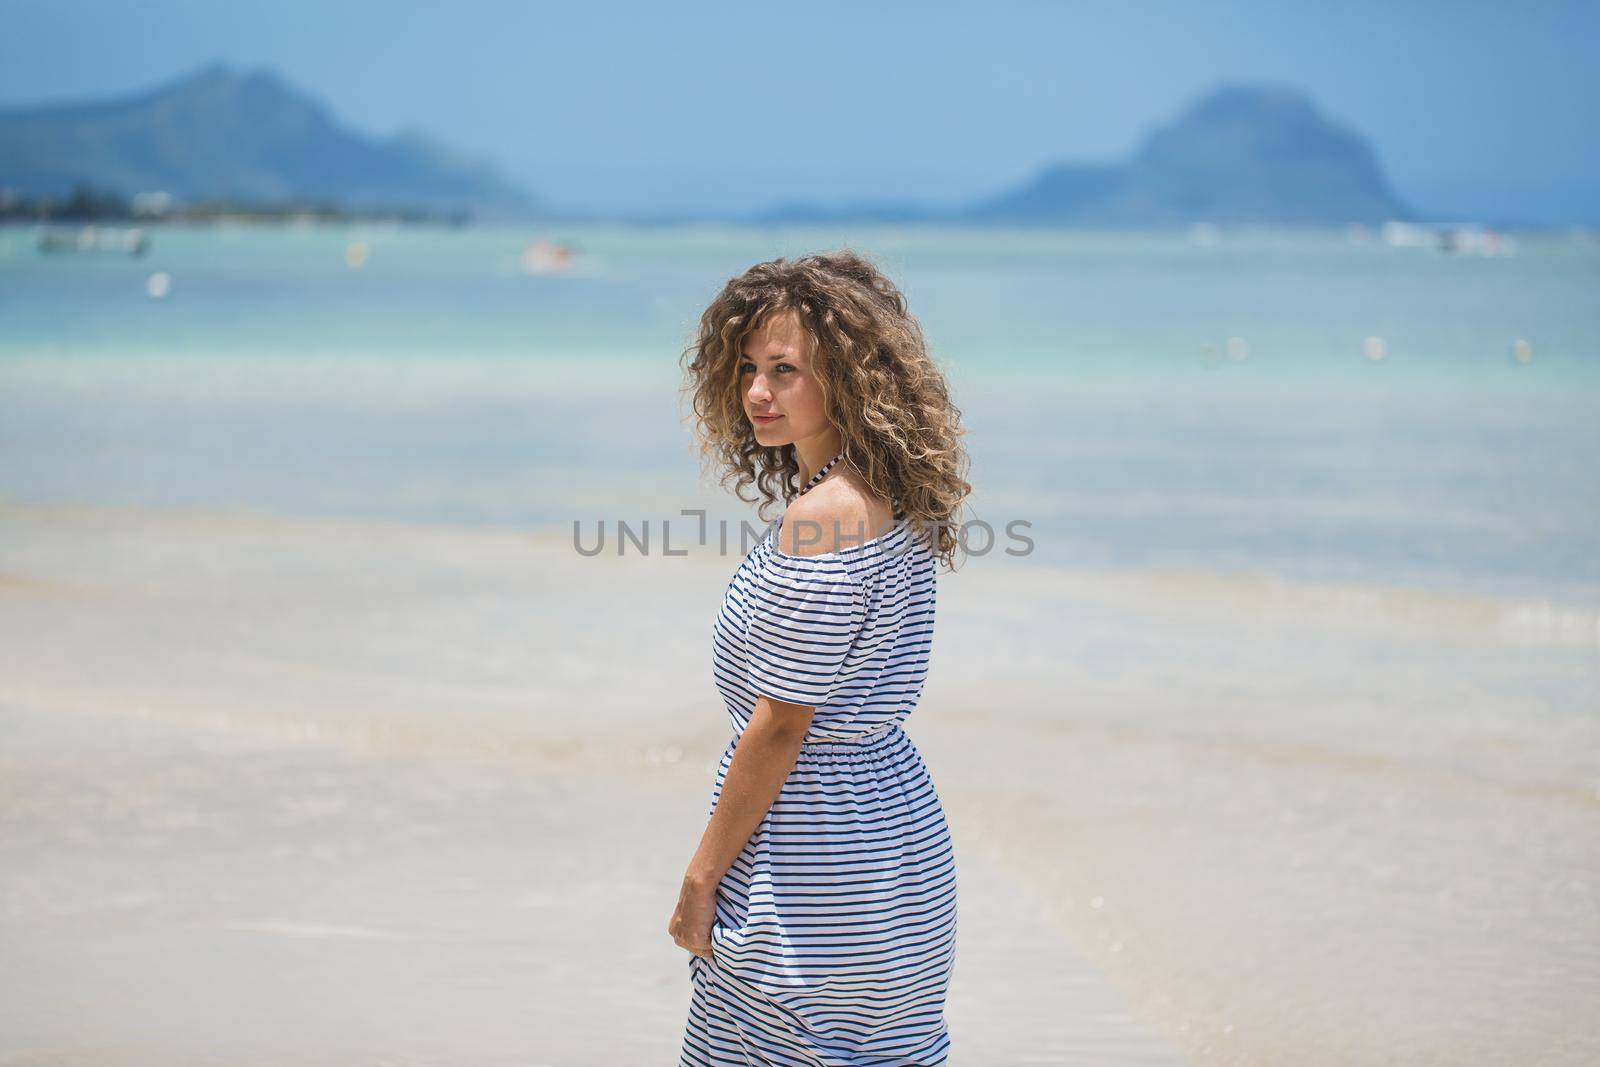 Beautiful girl in the Indian ocean with mountains in the background.